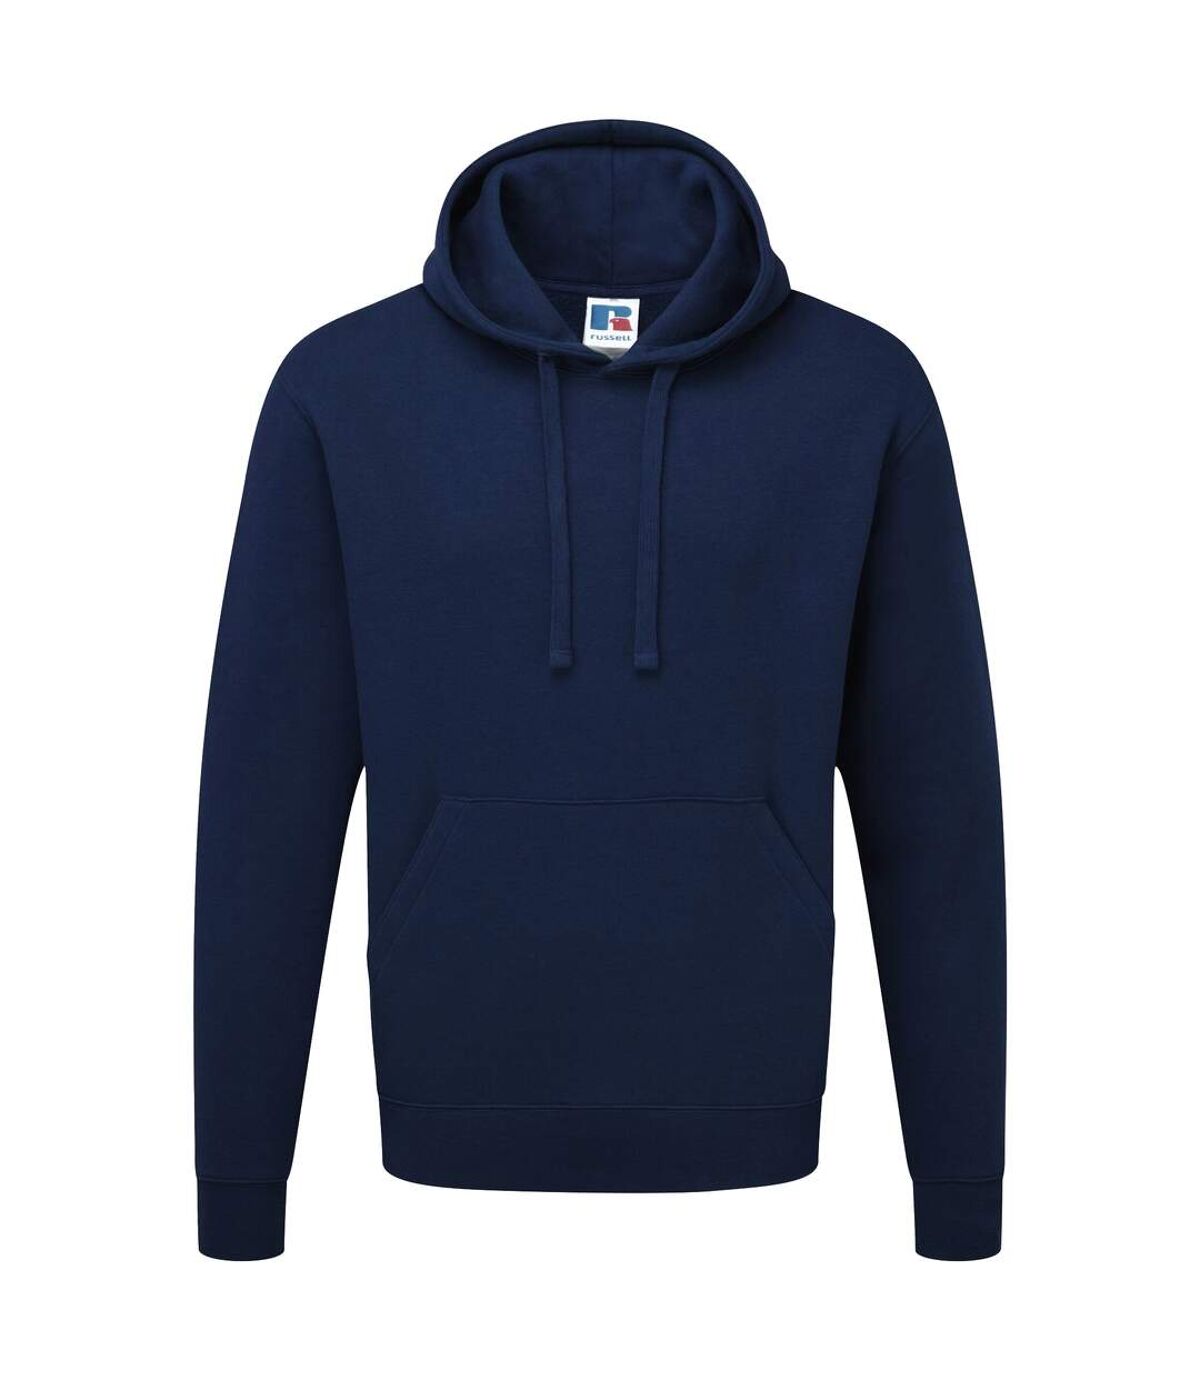 Russell Mens Authentic Hooded Sweatshirt / Hoodie (French Navy) - UTBC1498